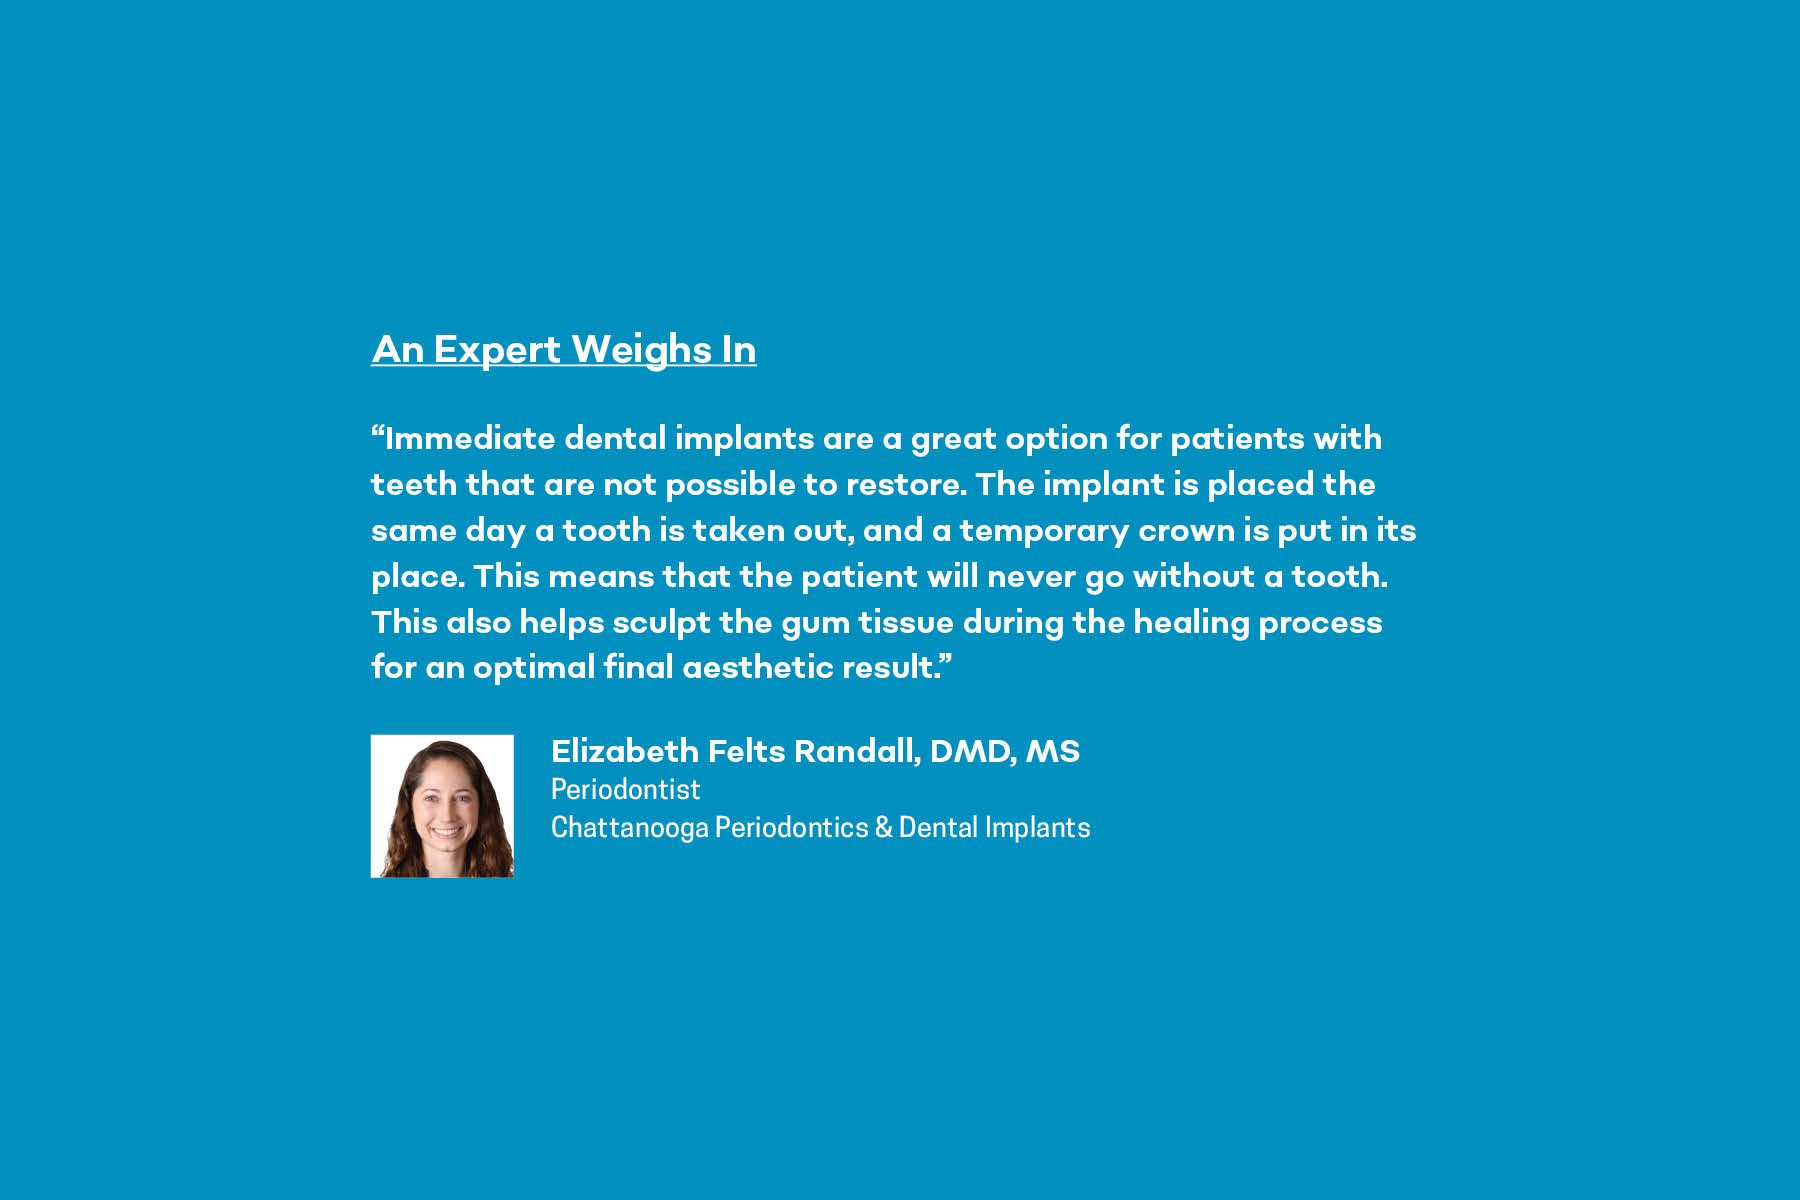 Expert opinion on immediate dental implants from Dr. Elizabeth Felts Randall at Chattanooga Periodontics and Dental Implants